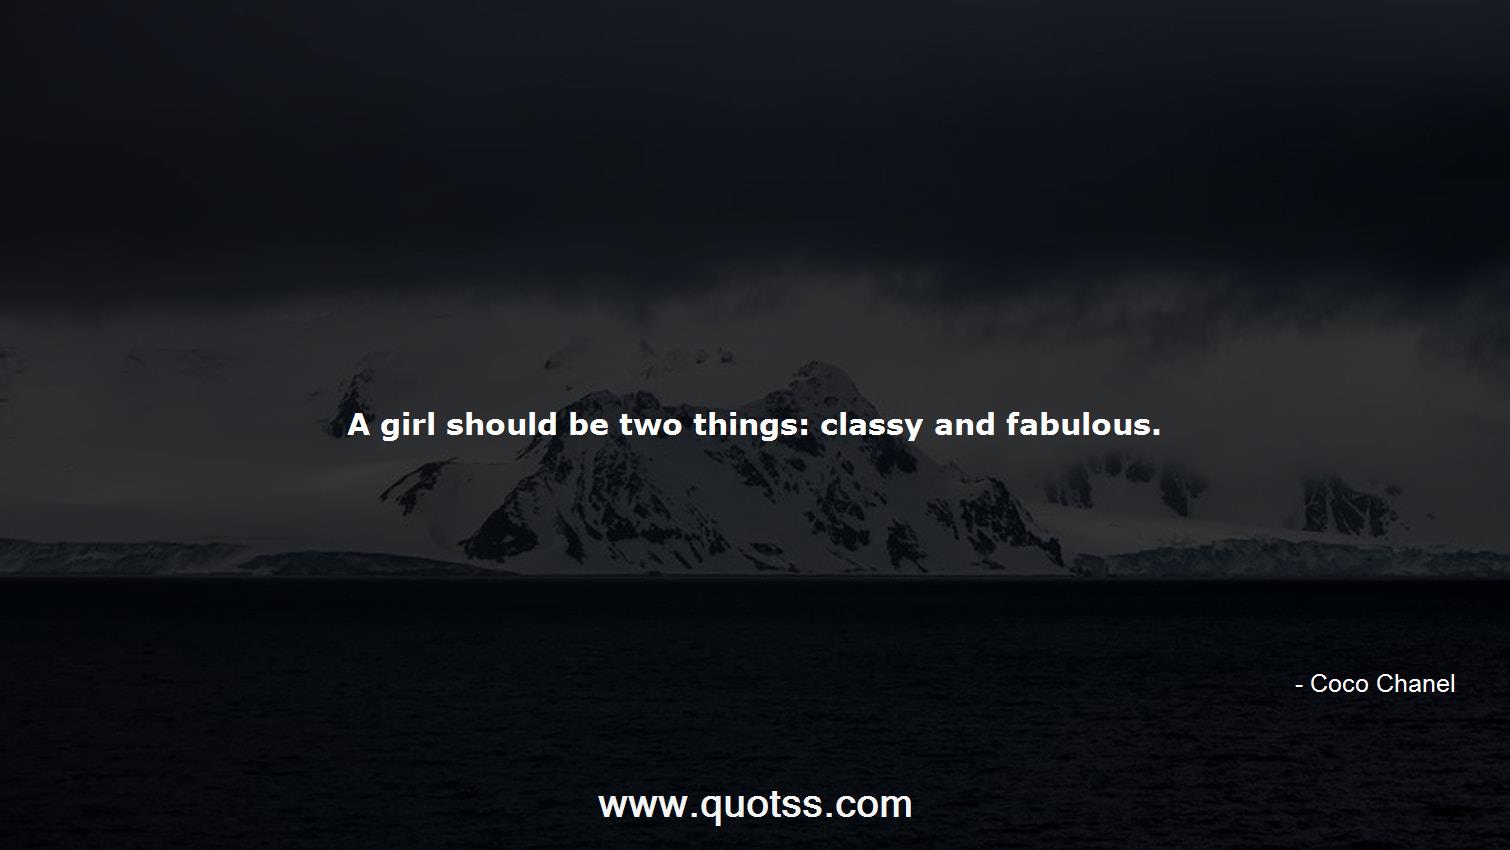 A girl should be two things: classy and fabulous.-Coco Chanel